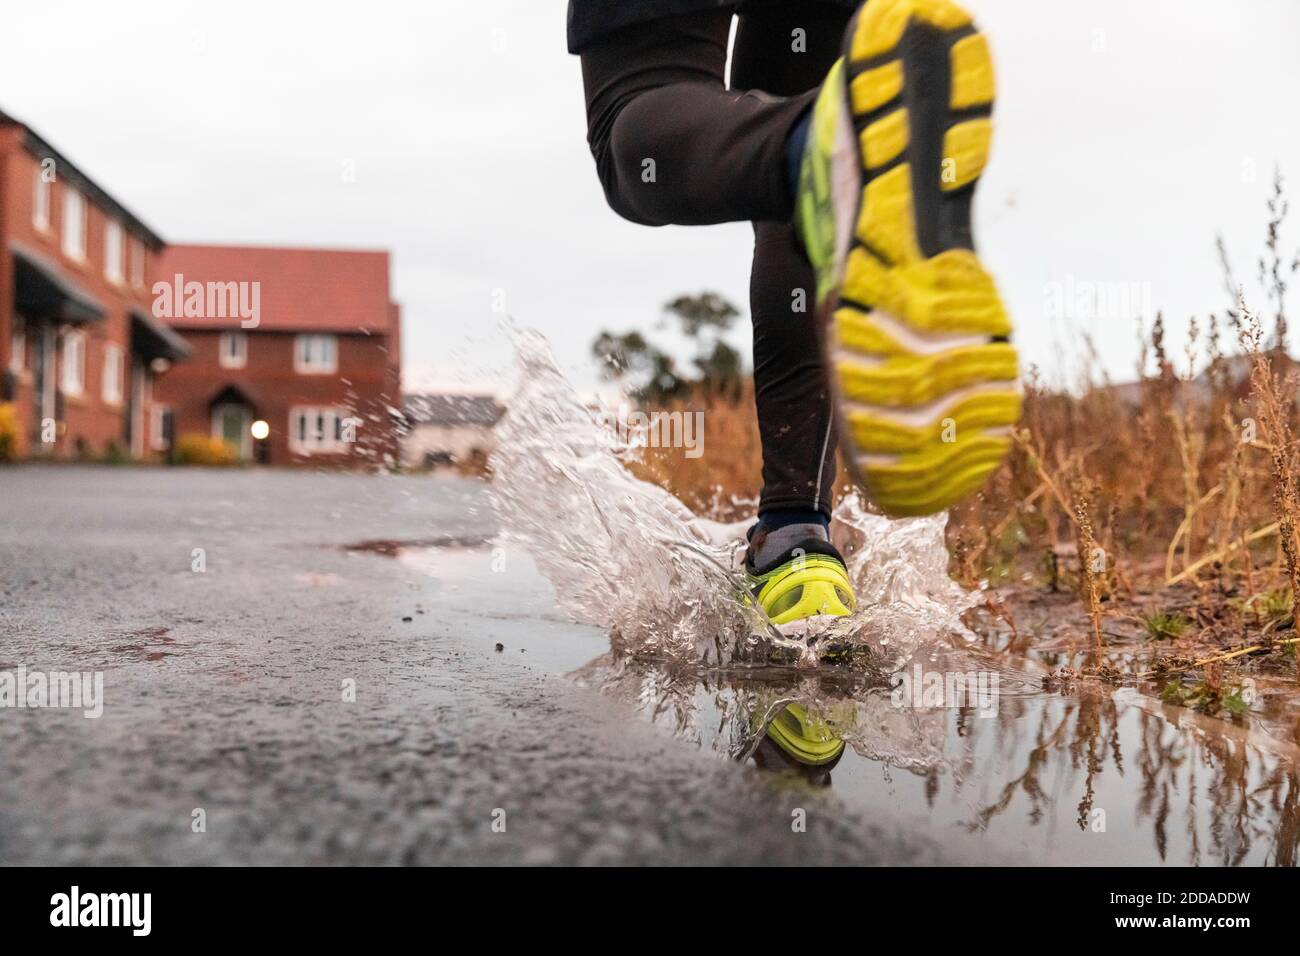 Low section of man running in water puddle during rainy season Stock Photo